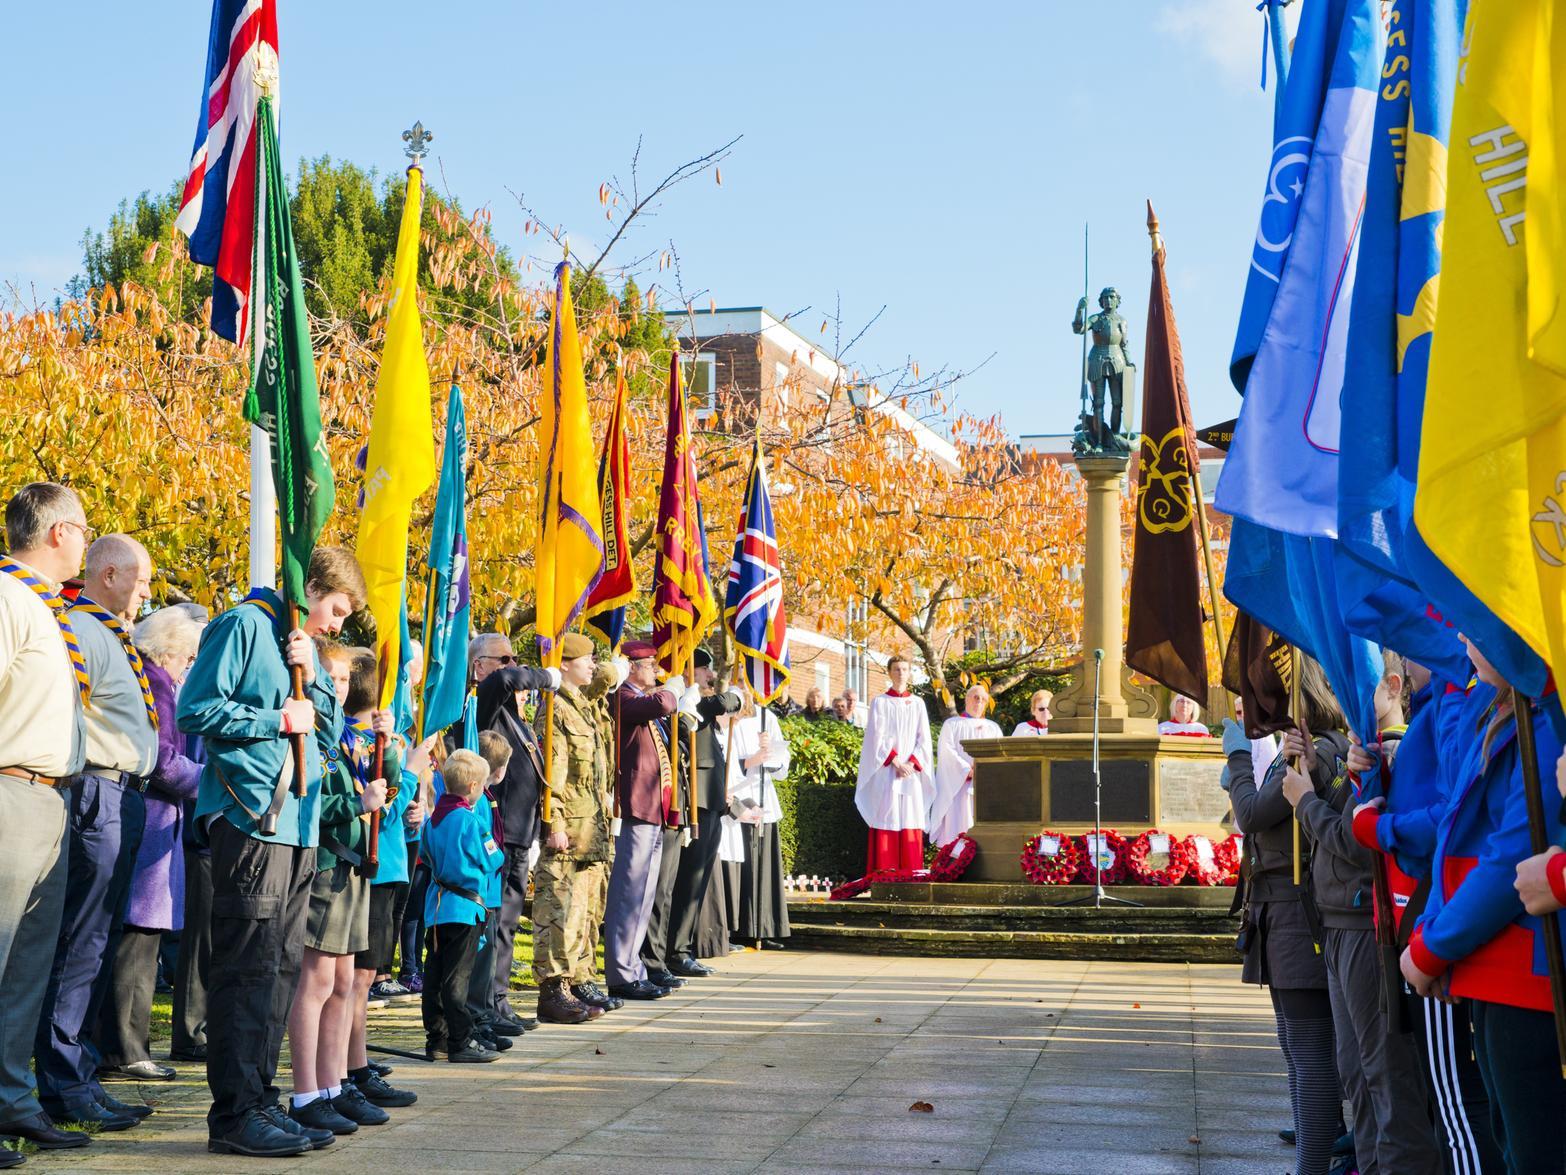 Remembrance Sunday services will take place across Mid Sussex. The Haywards Heath service will be on Sunday November 11 at Muster Green from 10.45am. Keep an eye on our website for more information closer to the time.